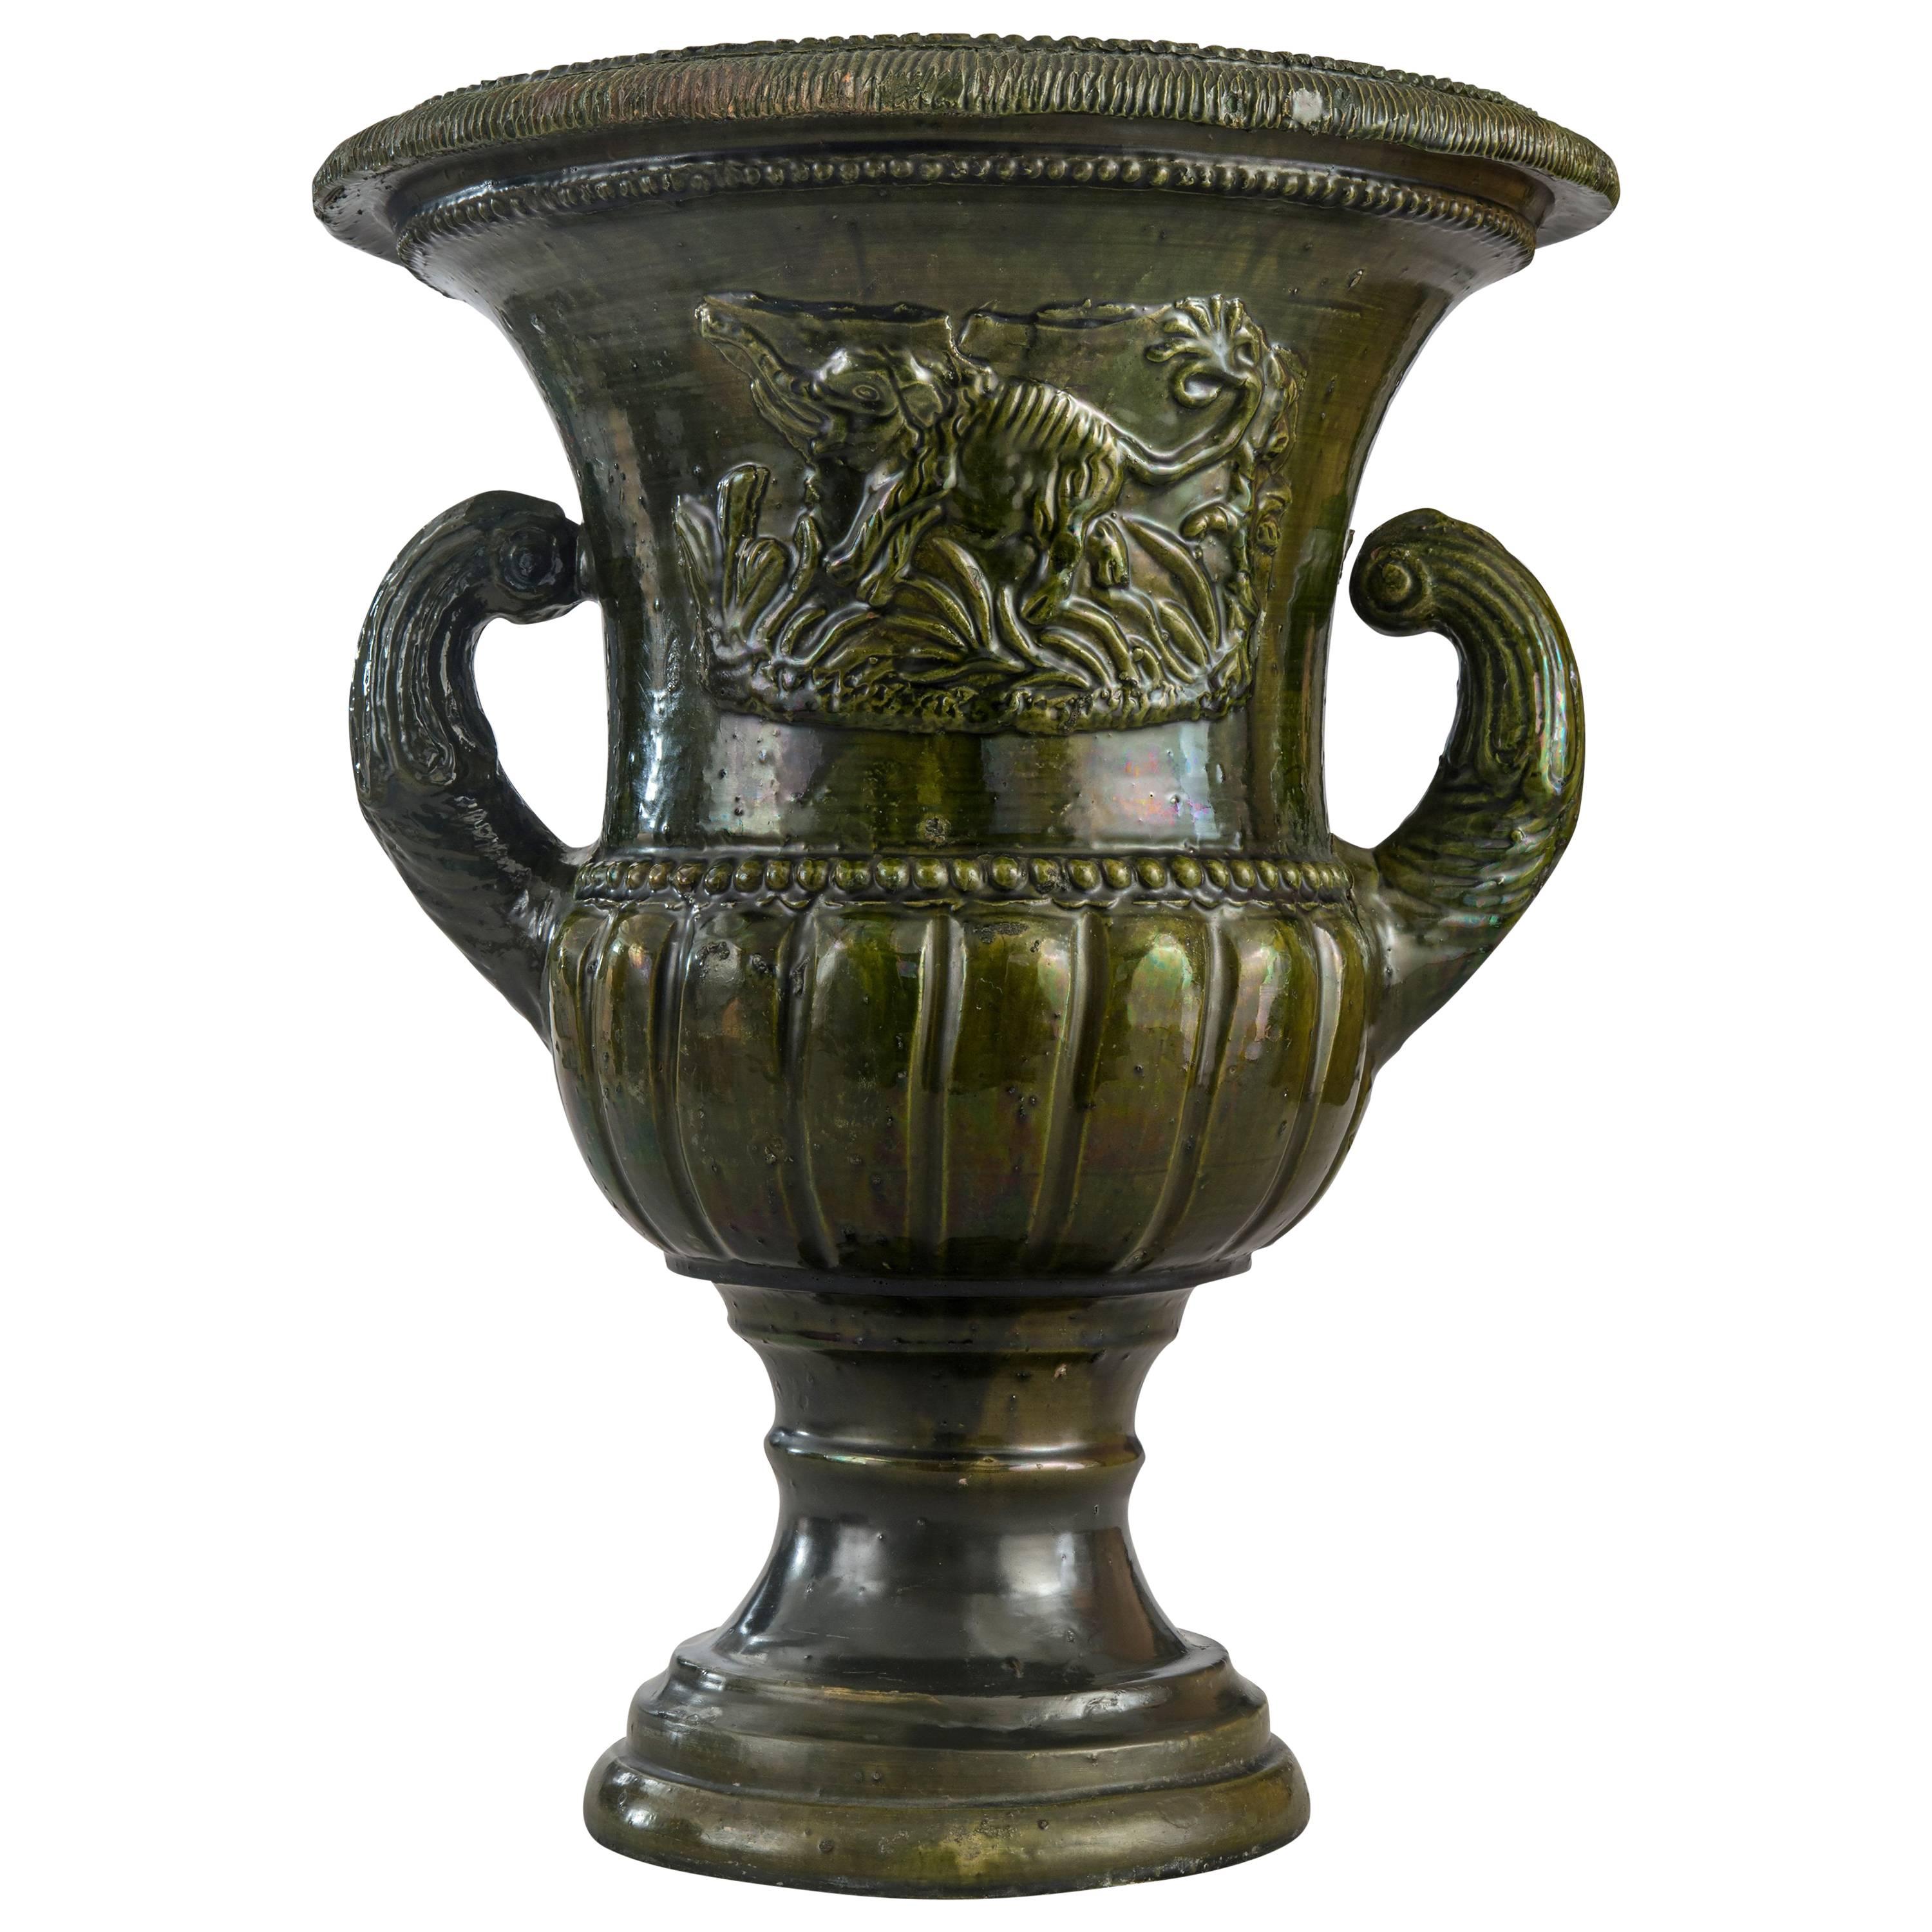 A French Green Glazed Faience Campana Urn with Elephant Relief For Sale